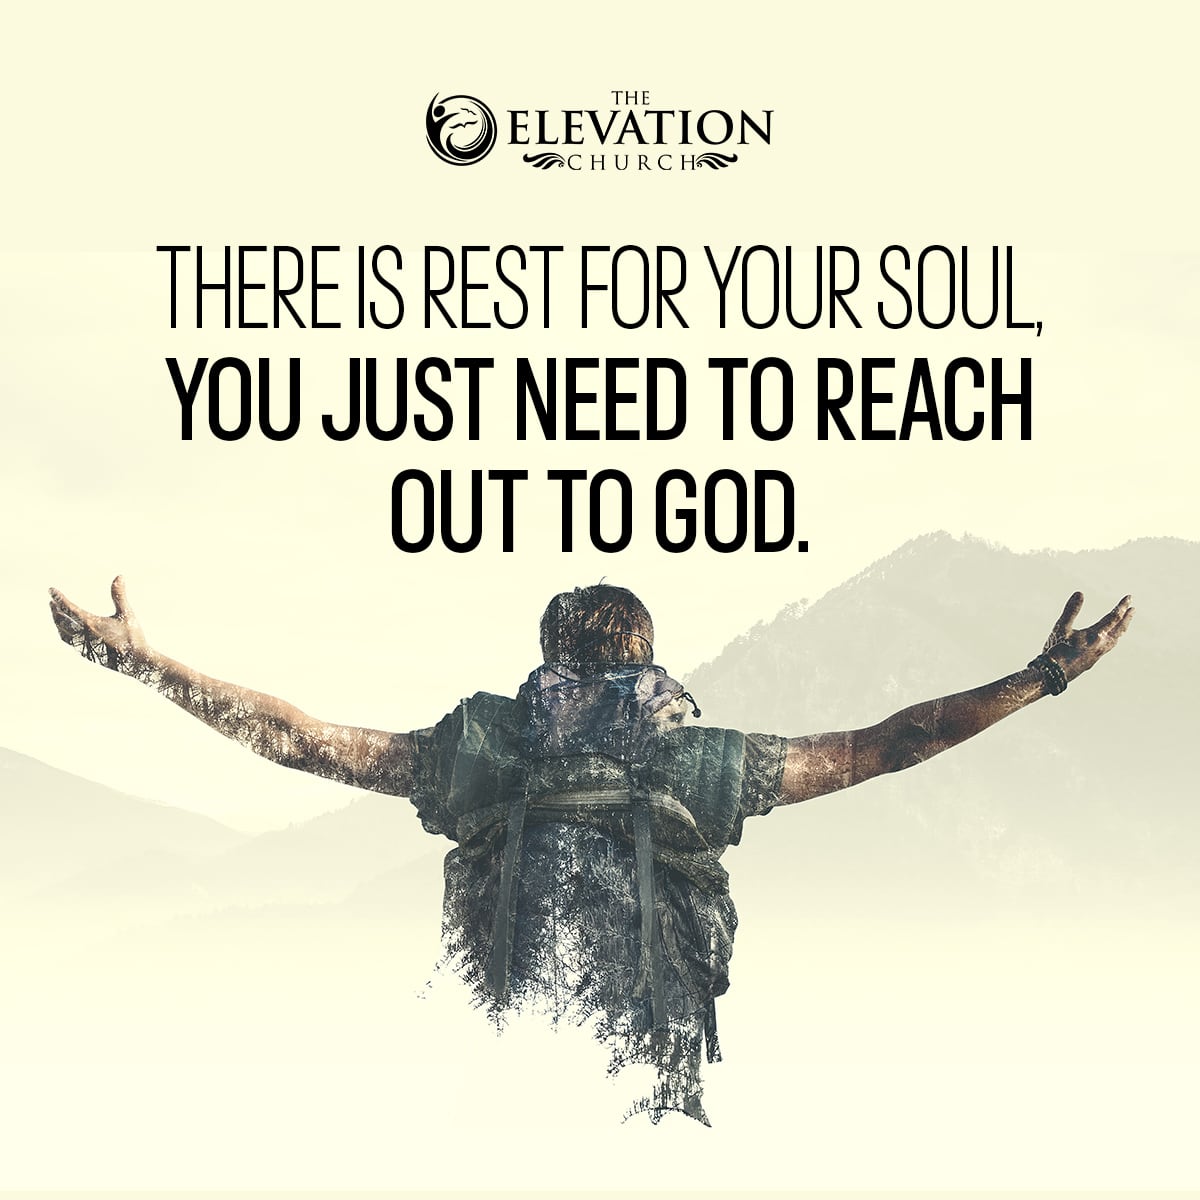 There is rest for your soul. You just need to reach out to God